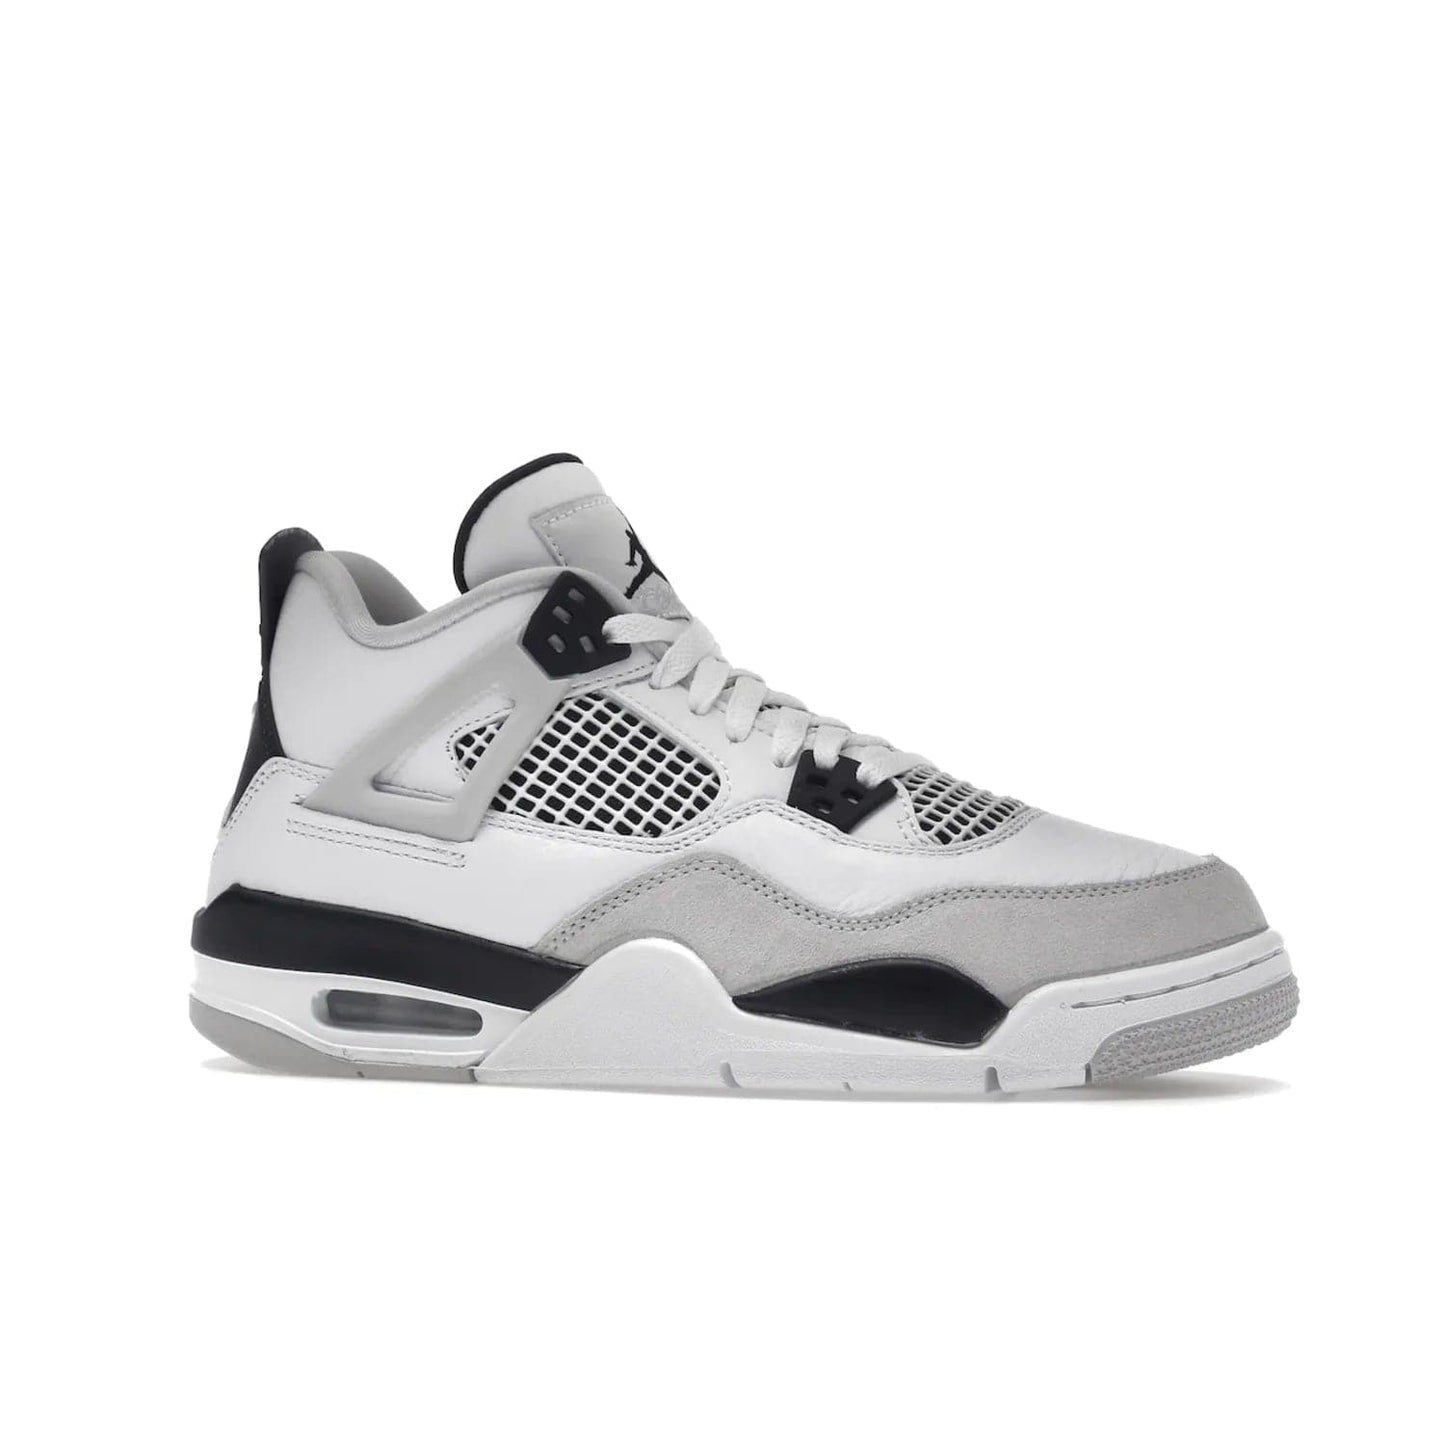 Jordan 4 Retro Military Black (GS) - Image 3 - Only at www.BallersClubKickz.com - A must-have for grade schoolers, the Air Jordan 4 Retro Military Black (GS) offers classic style with plenty of breathable support. Featuring a white sole and base with suede and leather overlays in subtle black and grey tones, the shoes are perfect for active pursuits and everyday comfort. Get an instant classic today!